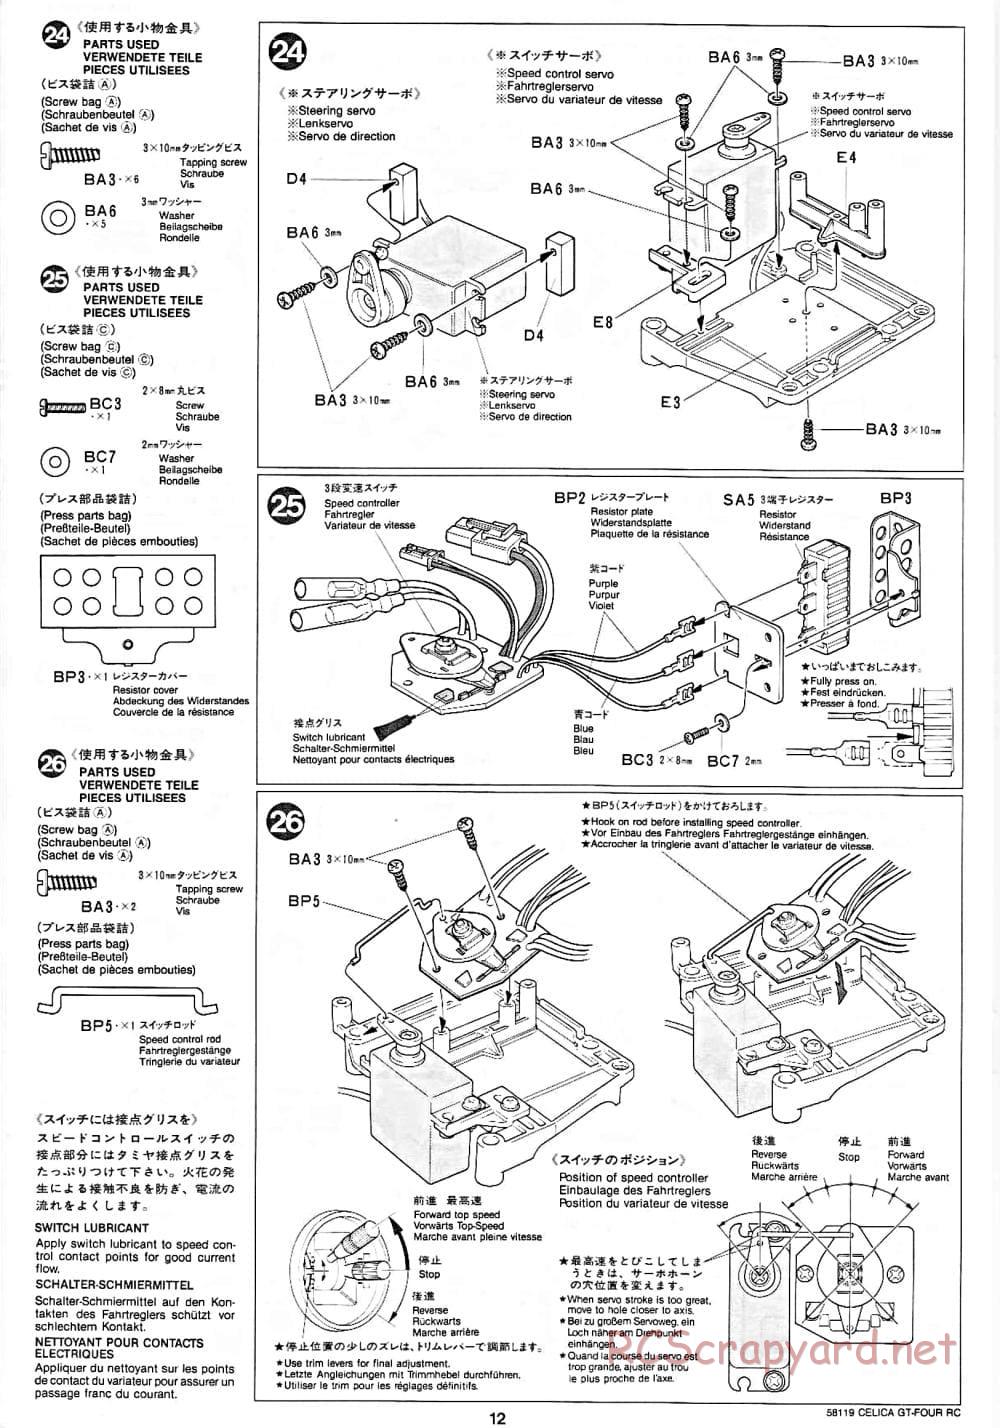 Tamiya - Toyota Celica GT-Four RC - TA-01 Chassis - Manual - Page 12